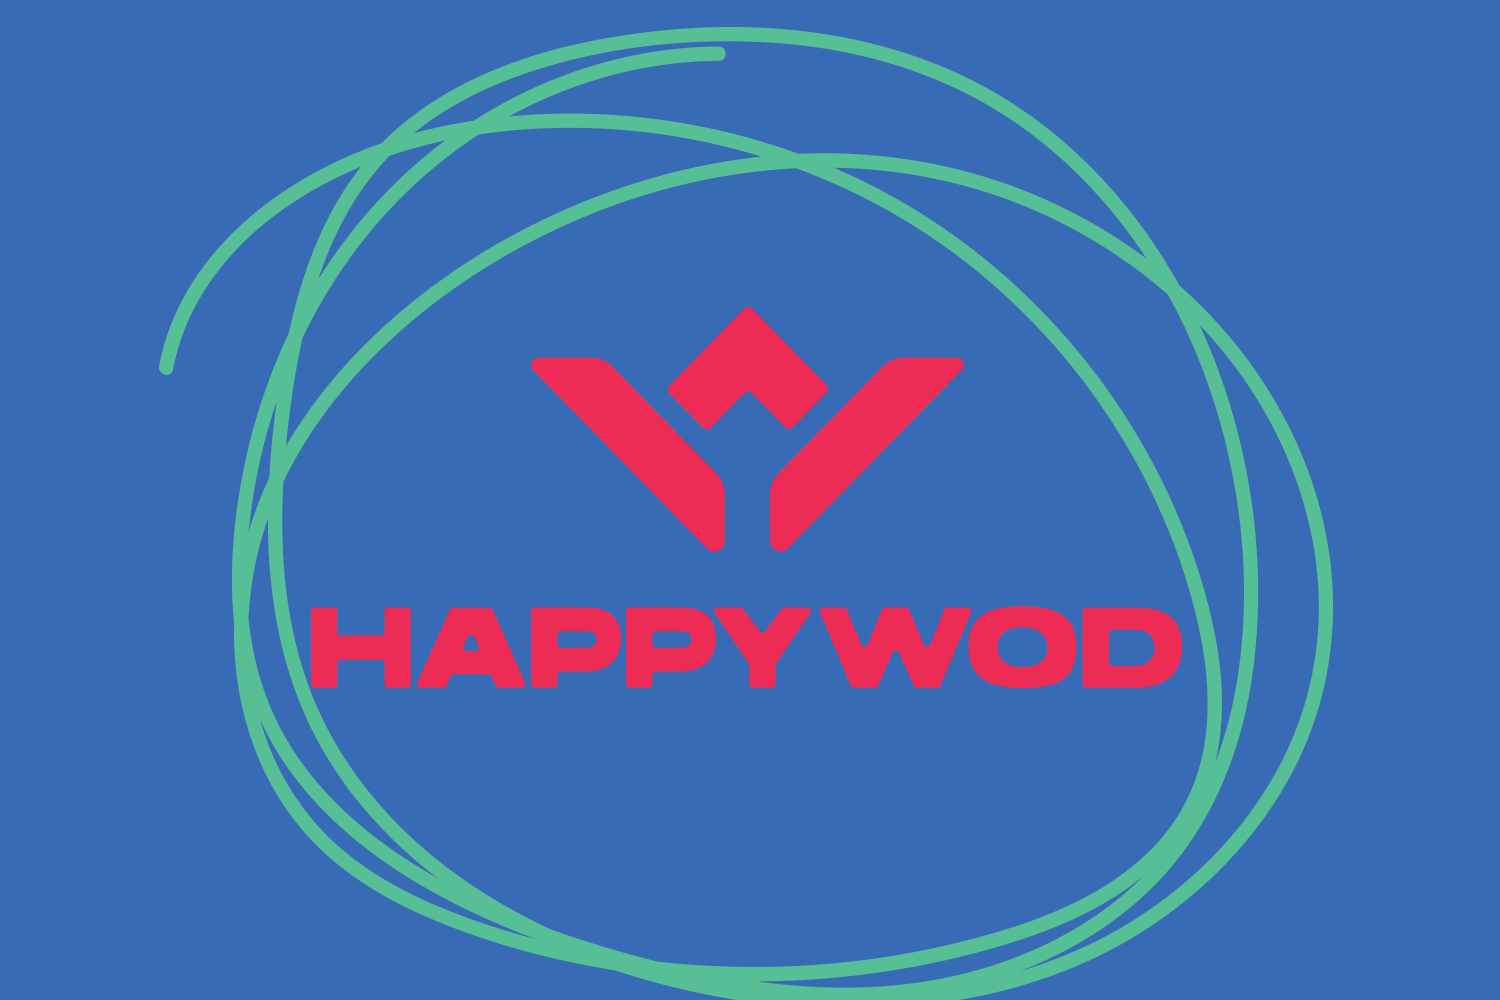 HappyWOD Vertical logo animation with varying colors and scribbles around